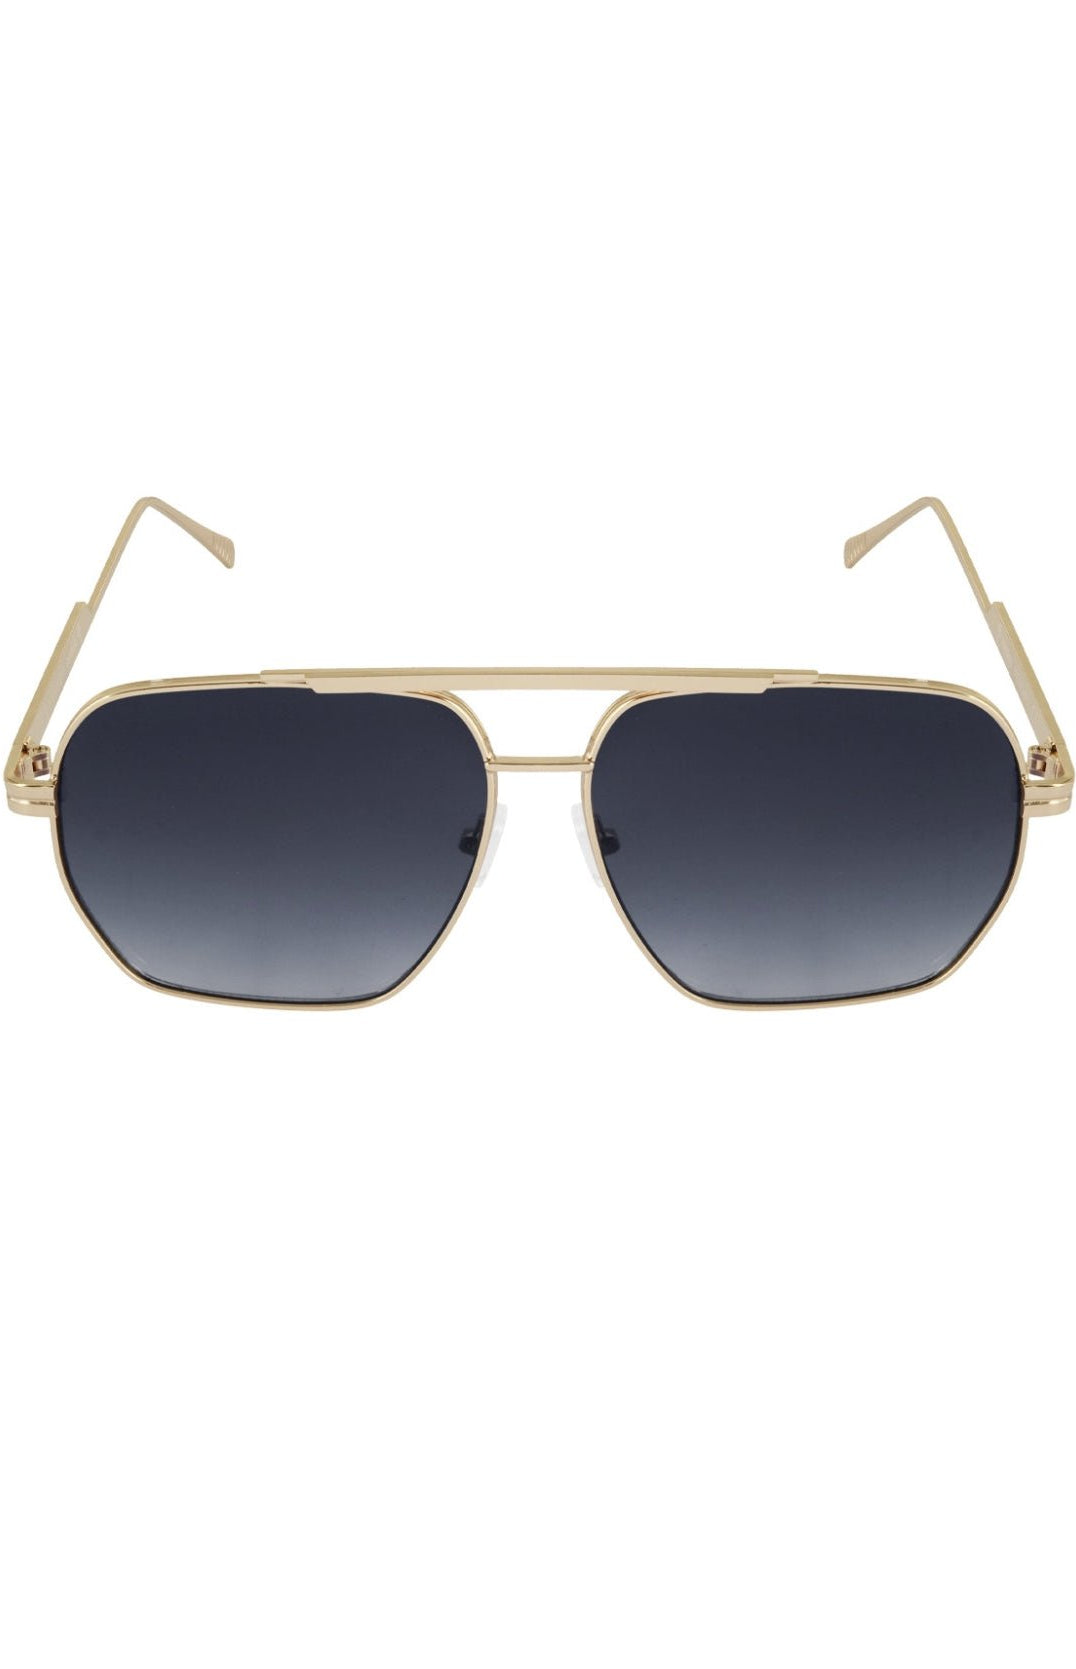 Metal summer sunglasses black and gold -